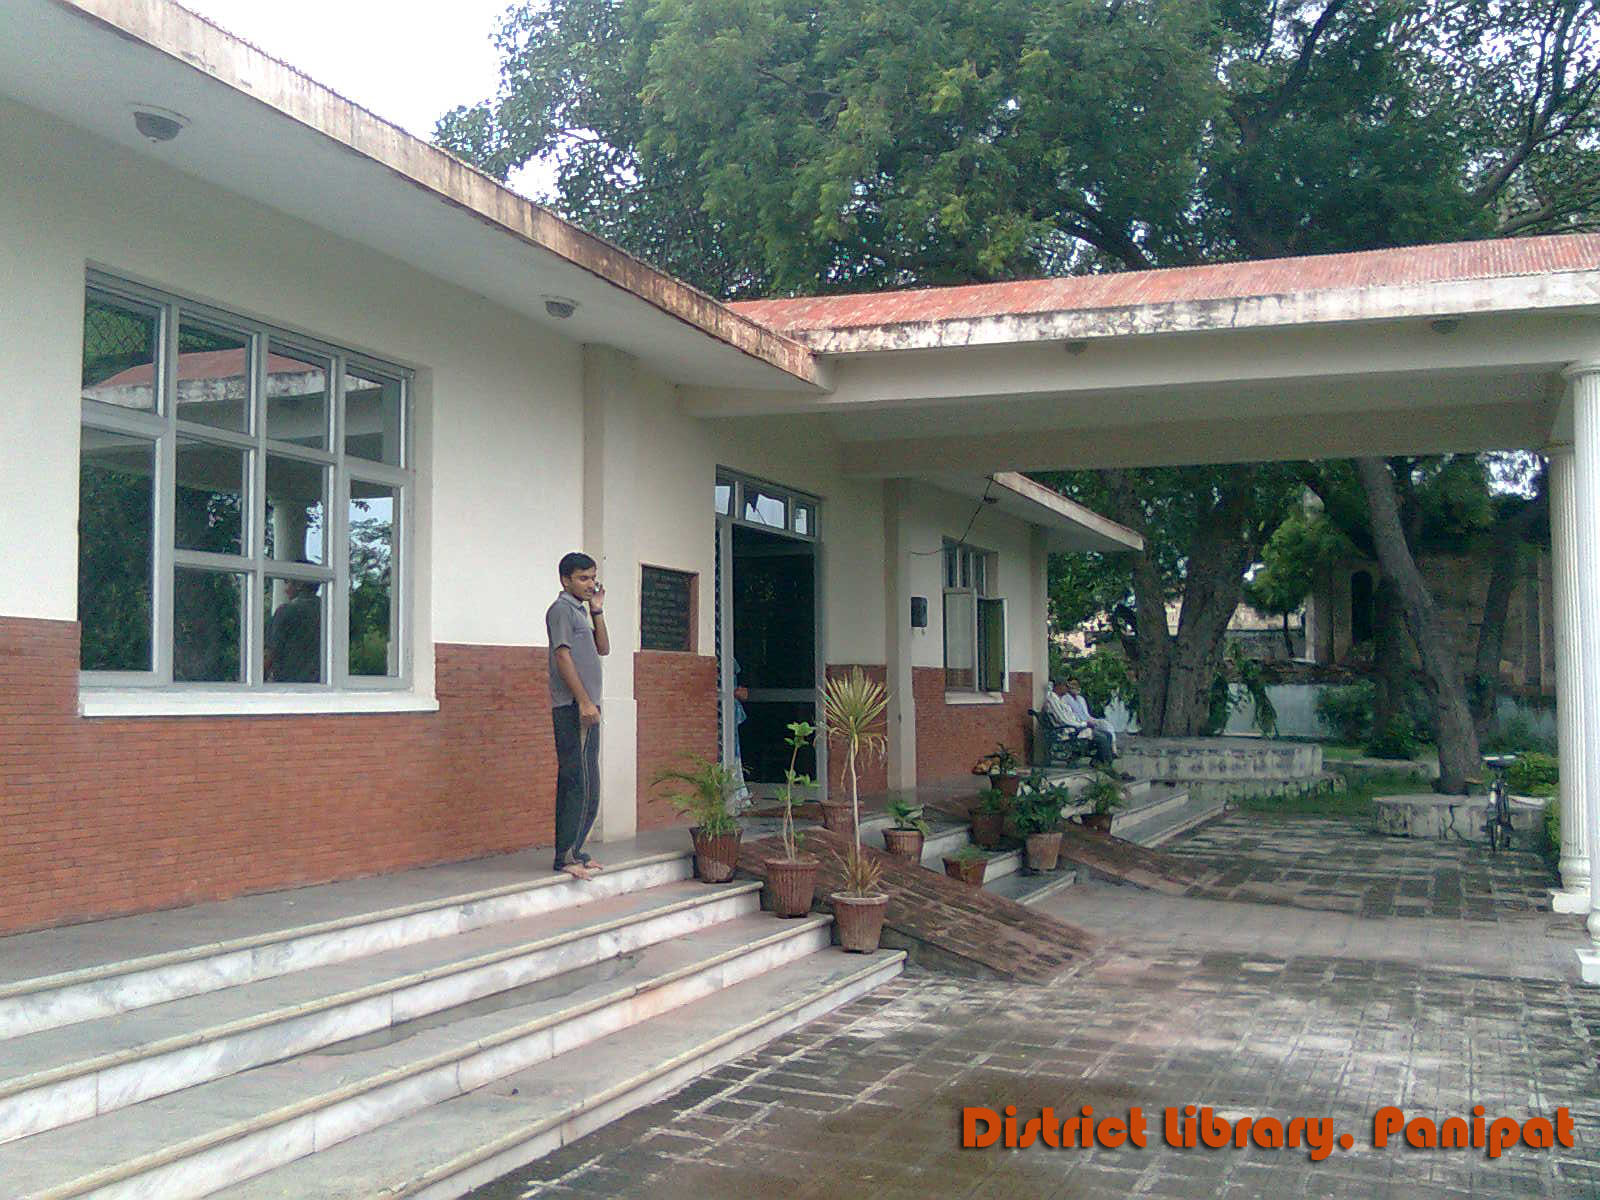 District Library, Panipat